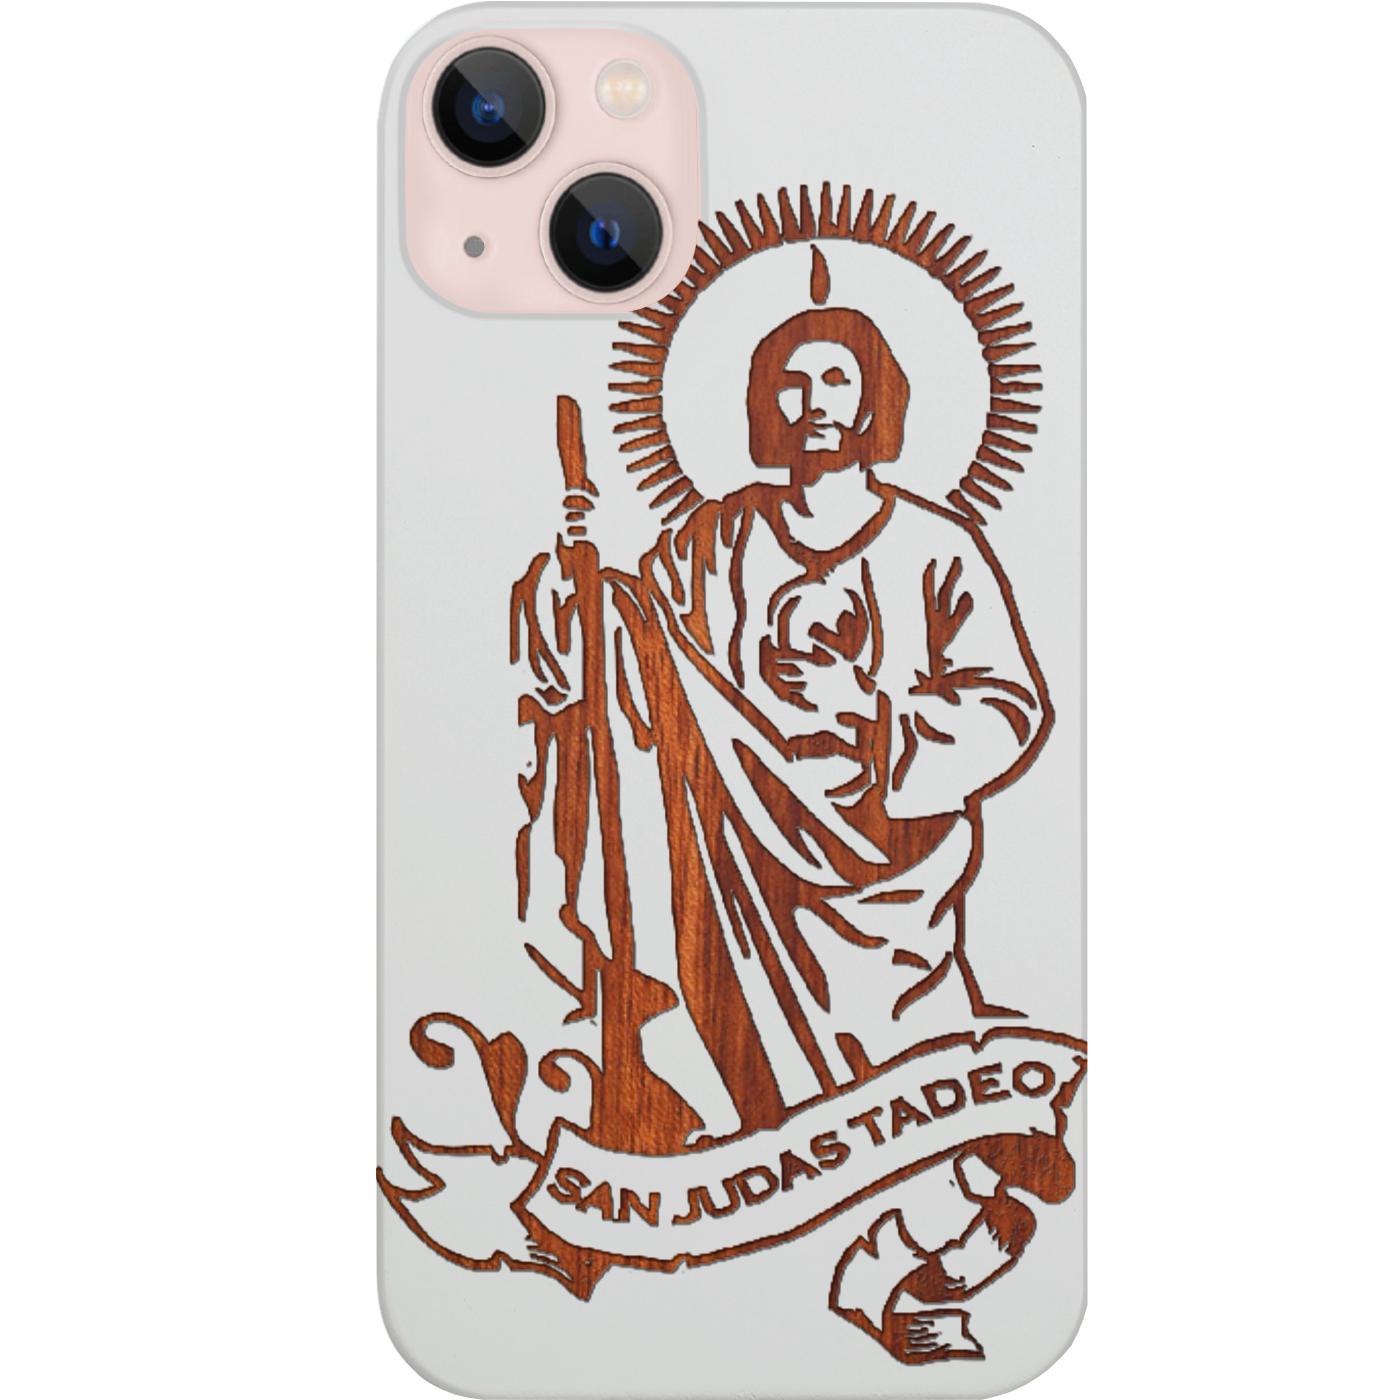 Our Lady of Guadalupe and San Judas Tadeo iPhone Case iPhone 11, iPhone  iPhone 12 Mini, iPhone 12, iPhone 12 Pro, iPhone 13 Mini, iPhone 13 